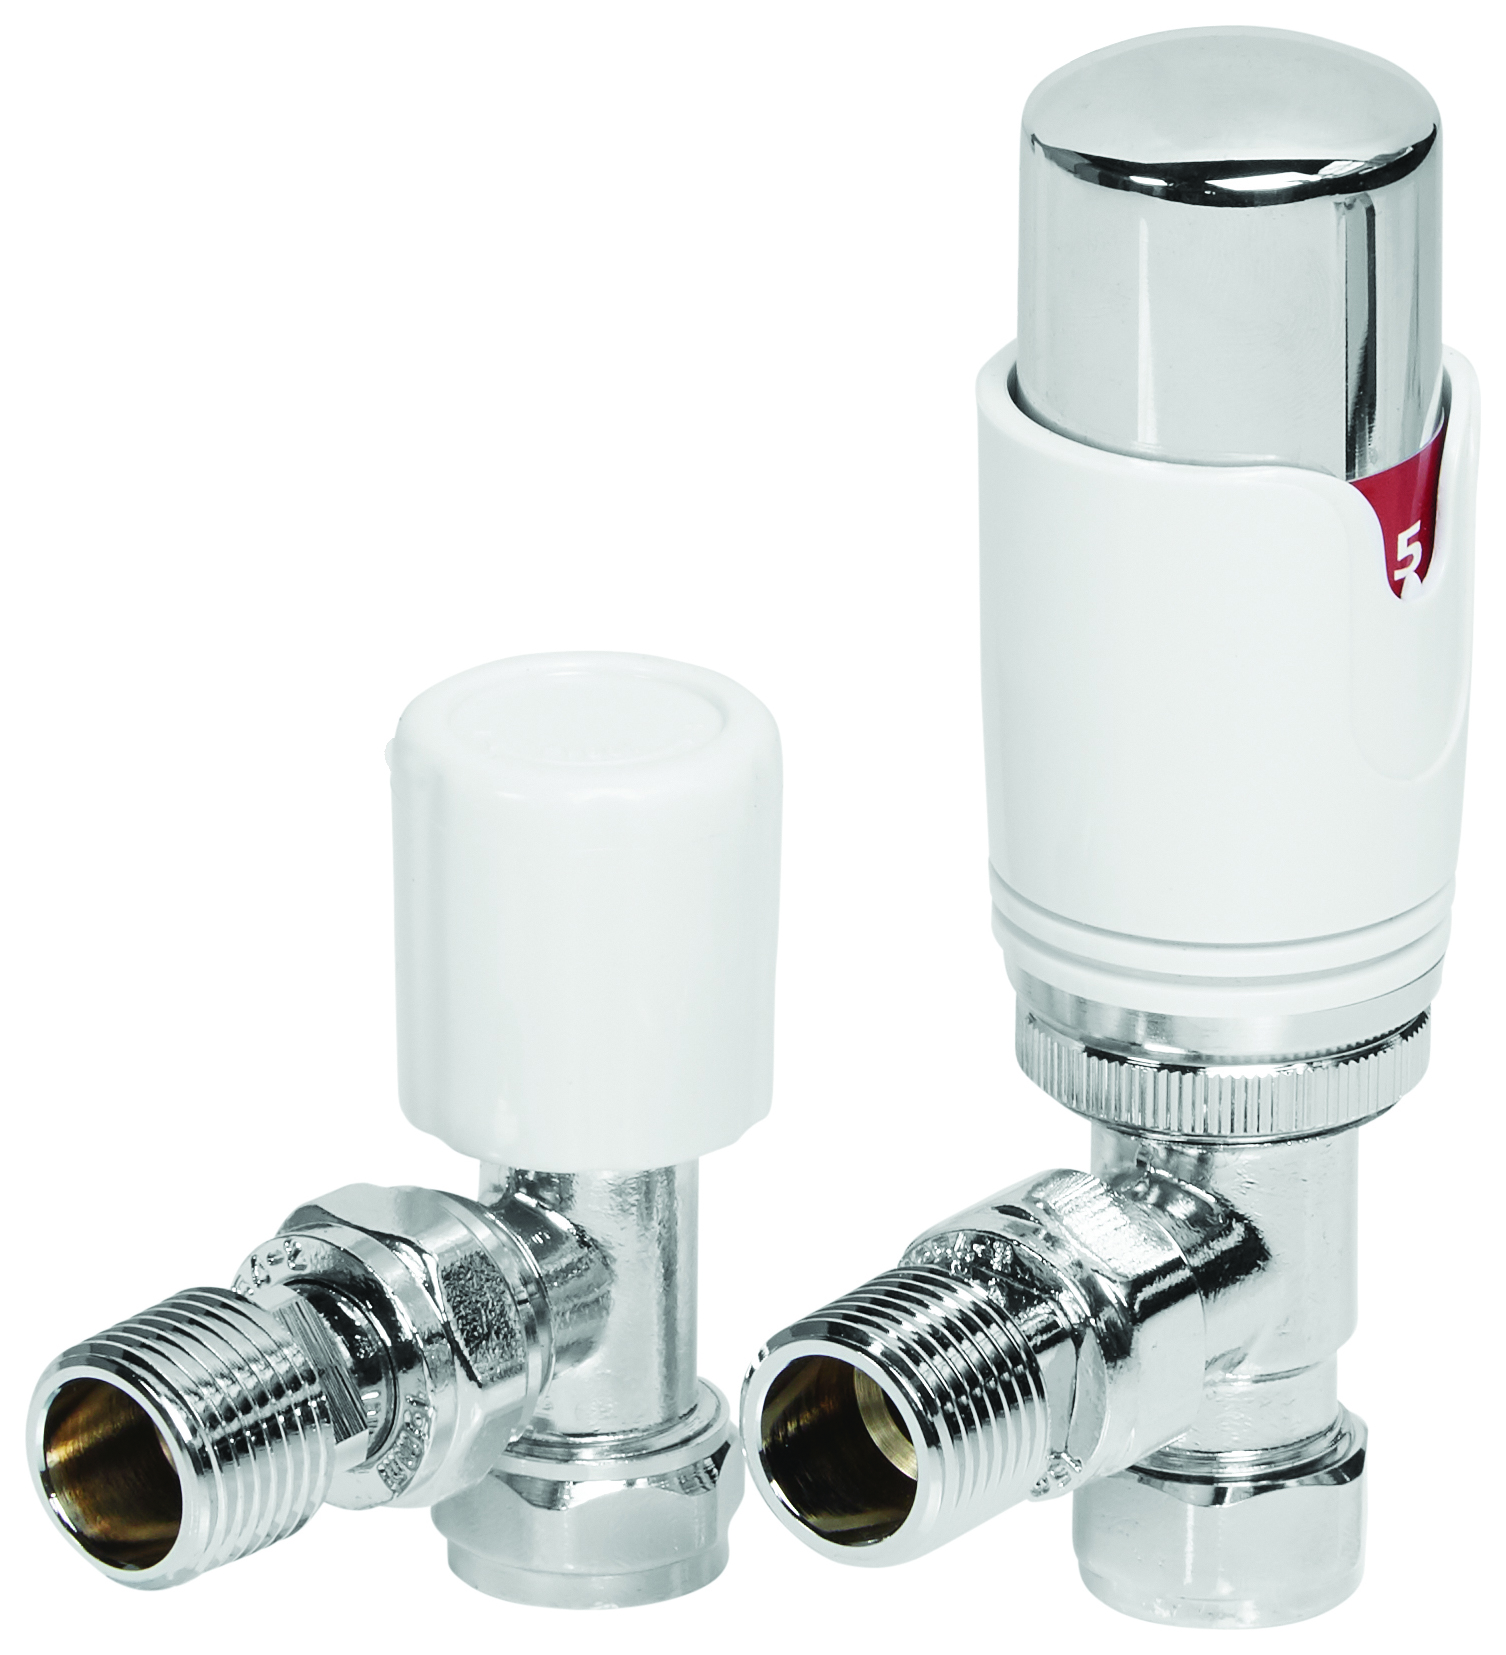 Image of Towelrads Angled Thermostatic Radiator Valve and Lockshield - White 15mm x 1/2"